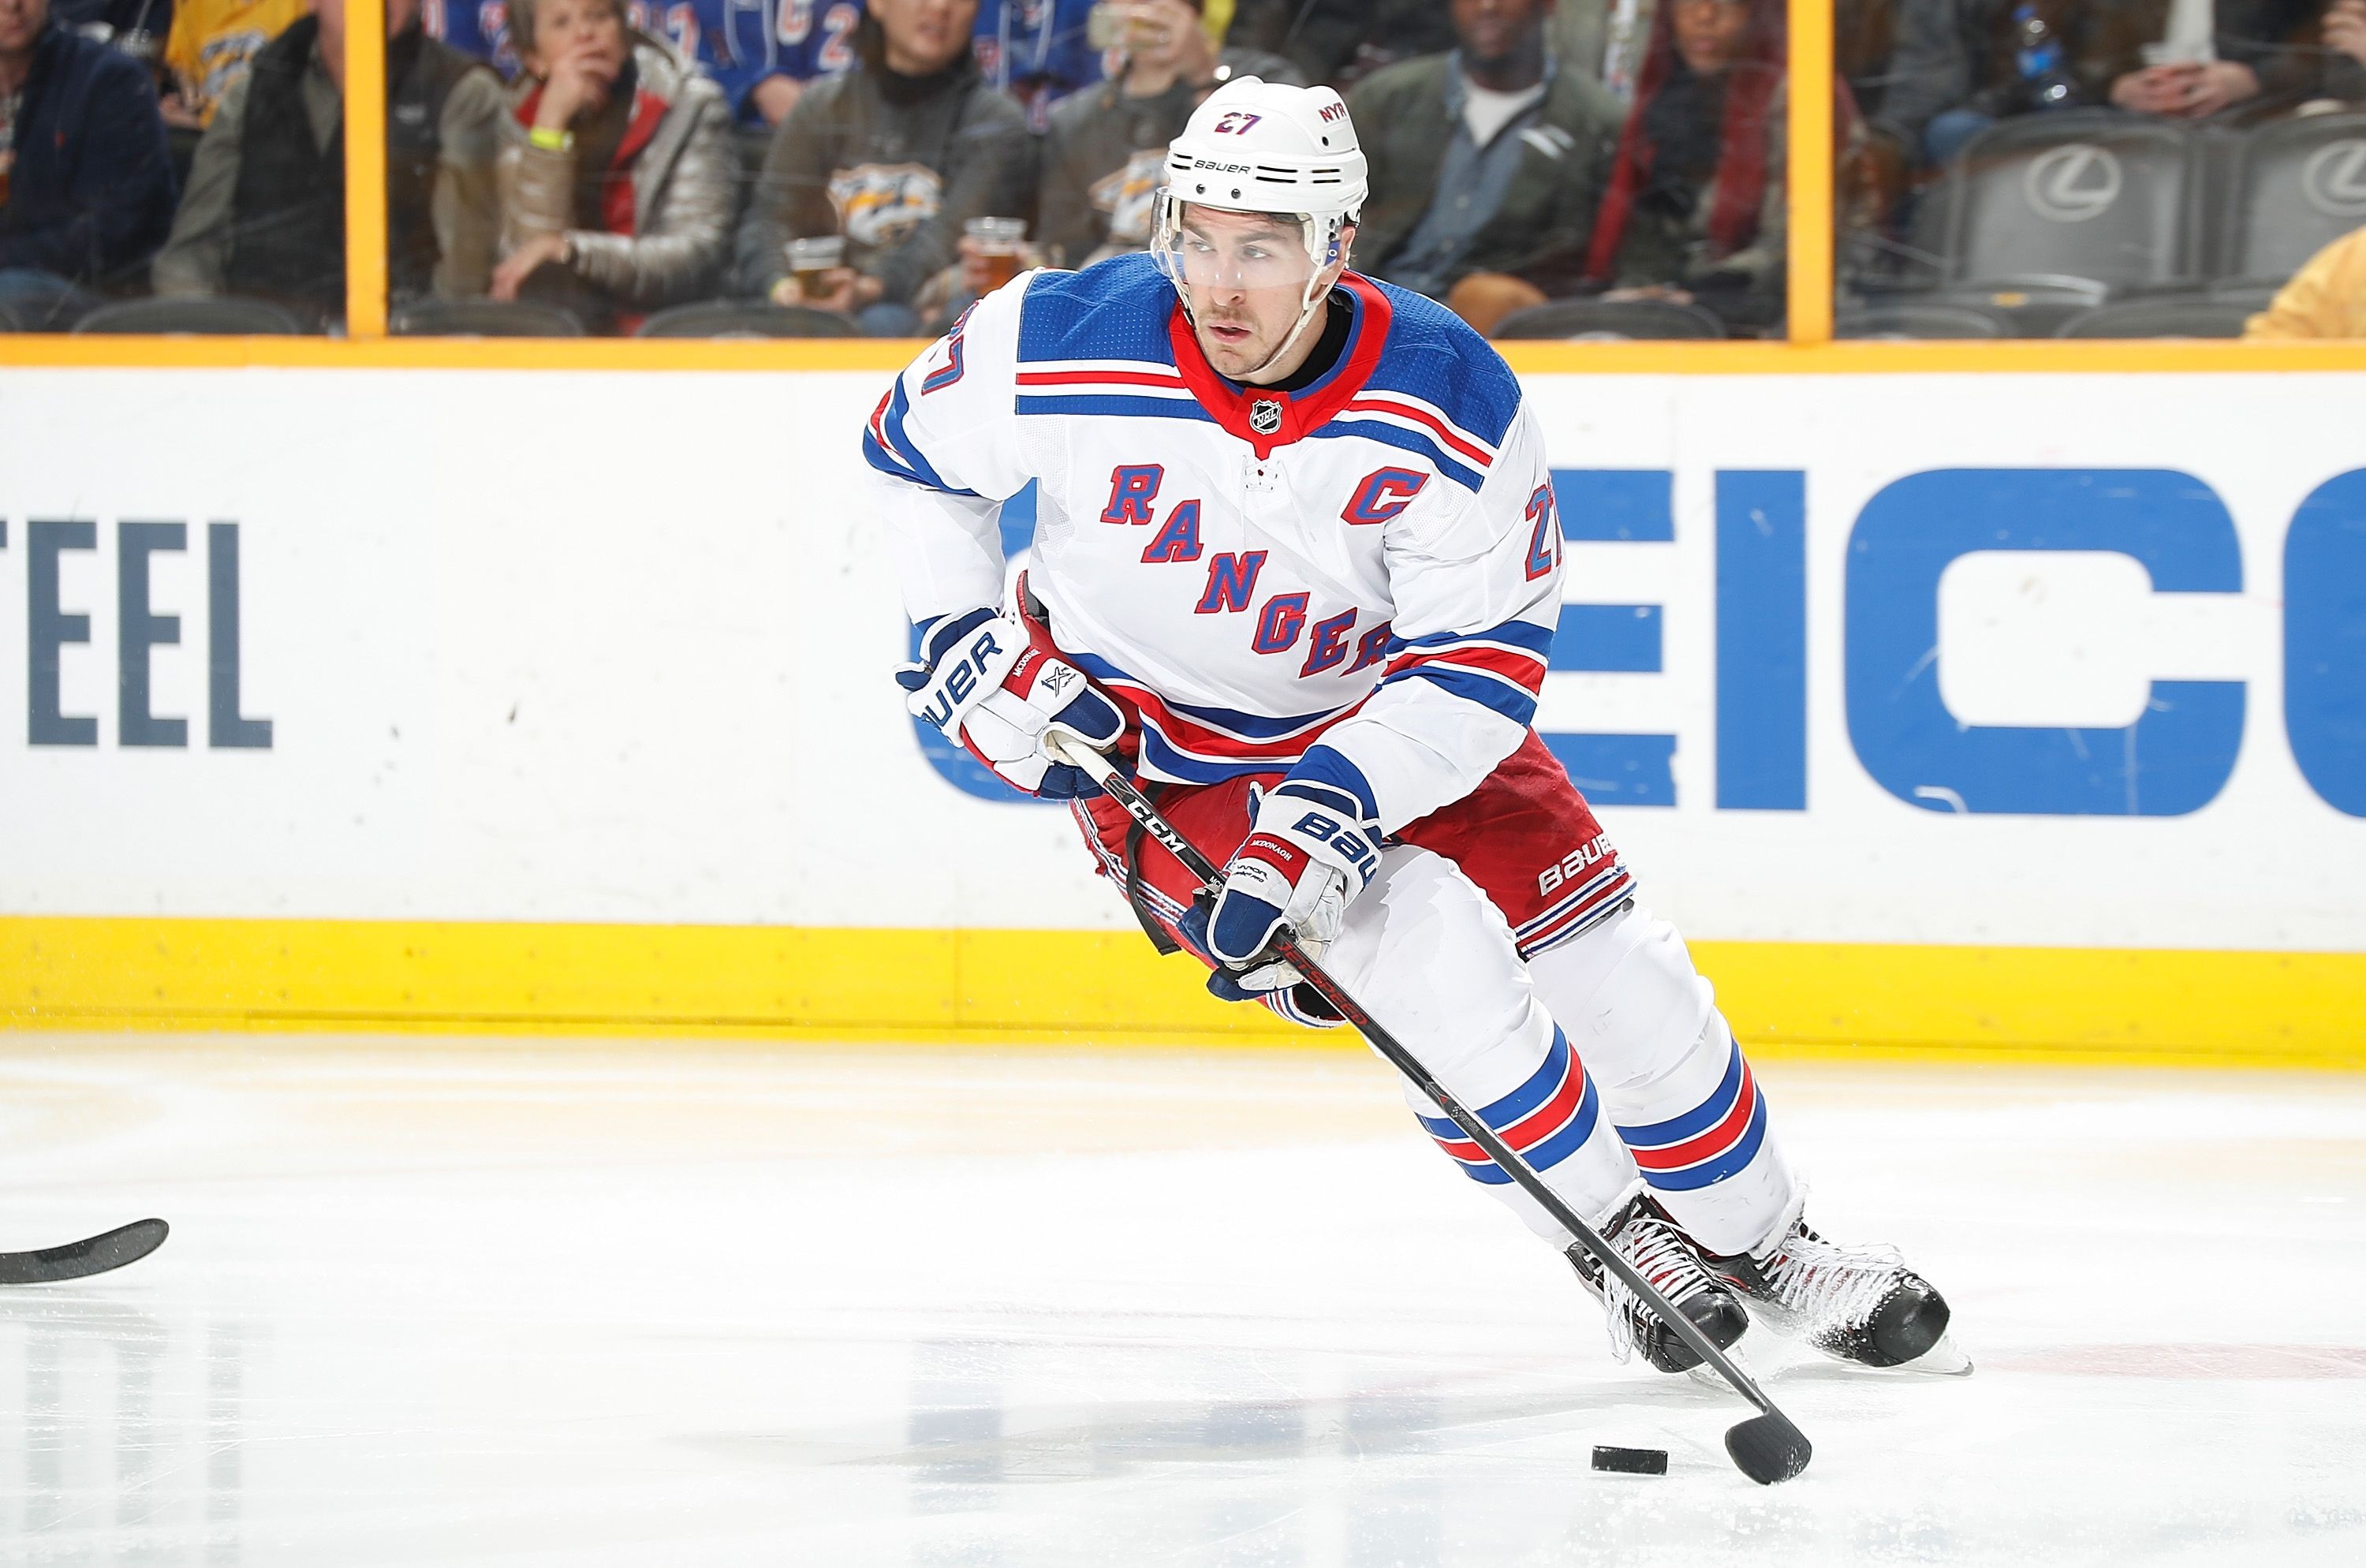 New York Rangers: Top 5 candidates to replace McDonagh as captain